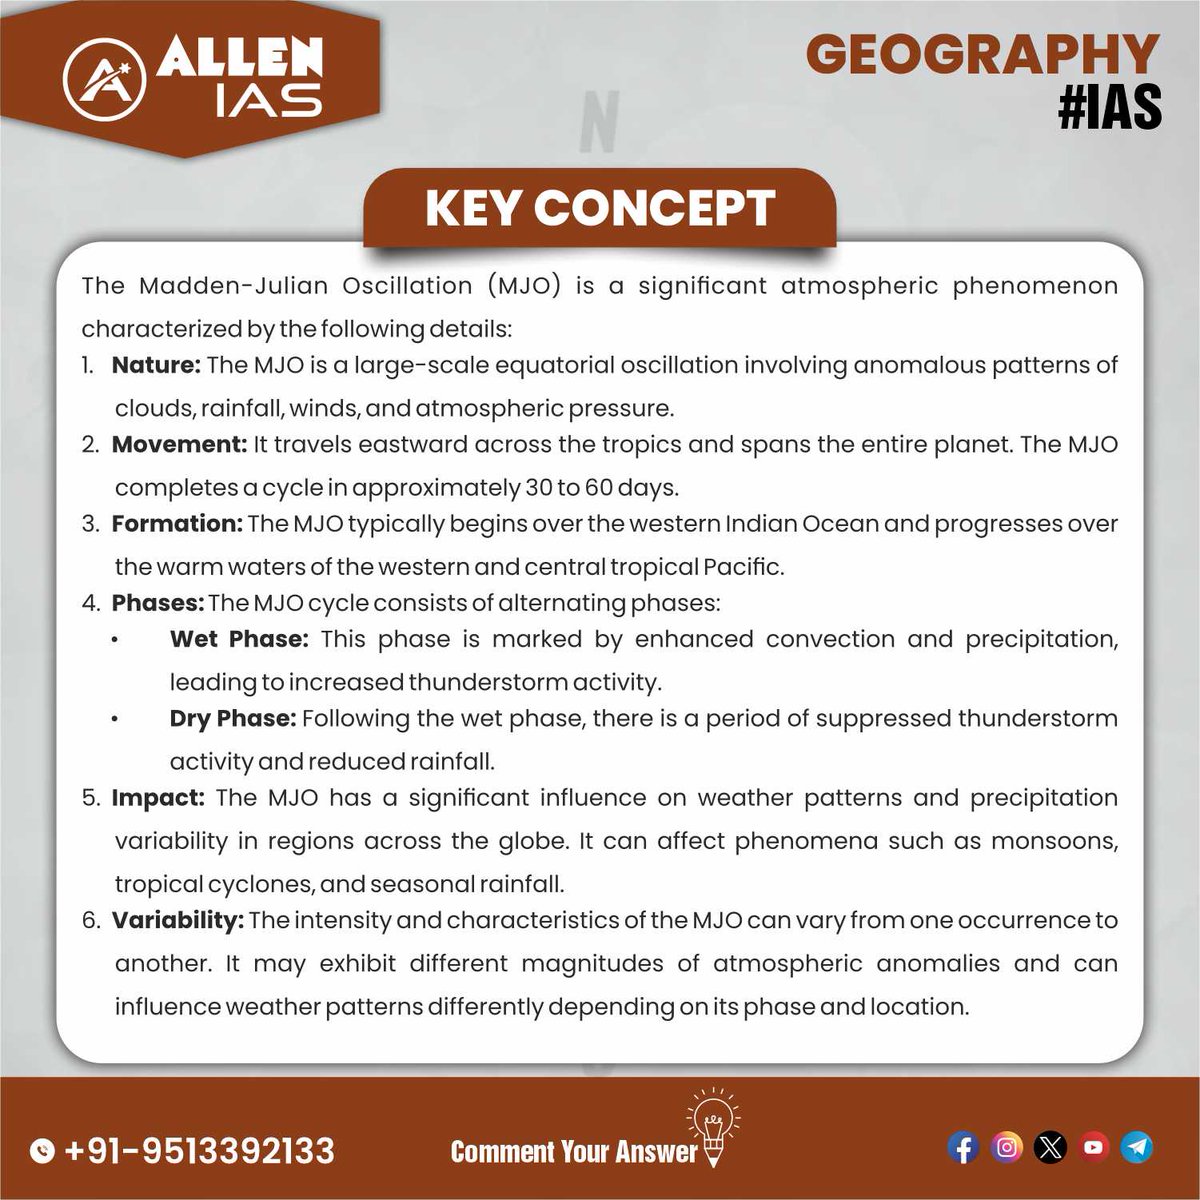 ➡️Daily practice, daily progress.

📌Join our UPSC prep telegram channel for your daily dose of exam-ready key concepts and questions.

#geography #geographyfacts #geographyquiz #ias #upsc #ips #upscexam #PCS #LBSNAA #upscaspirants #upscmotivation #allenace